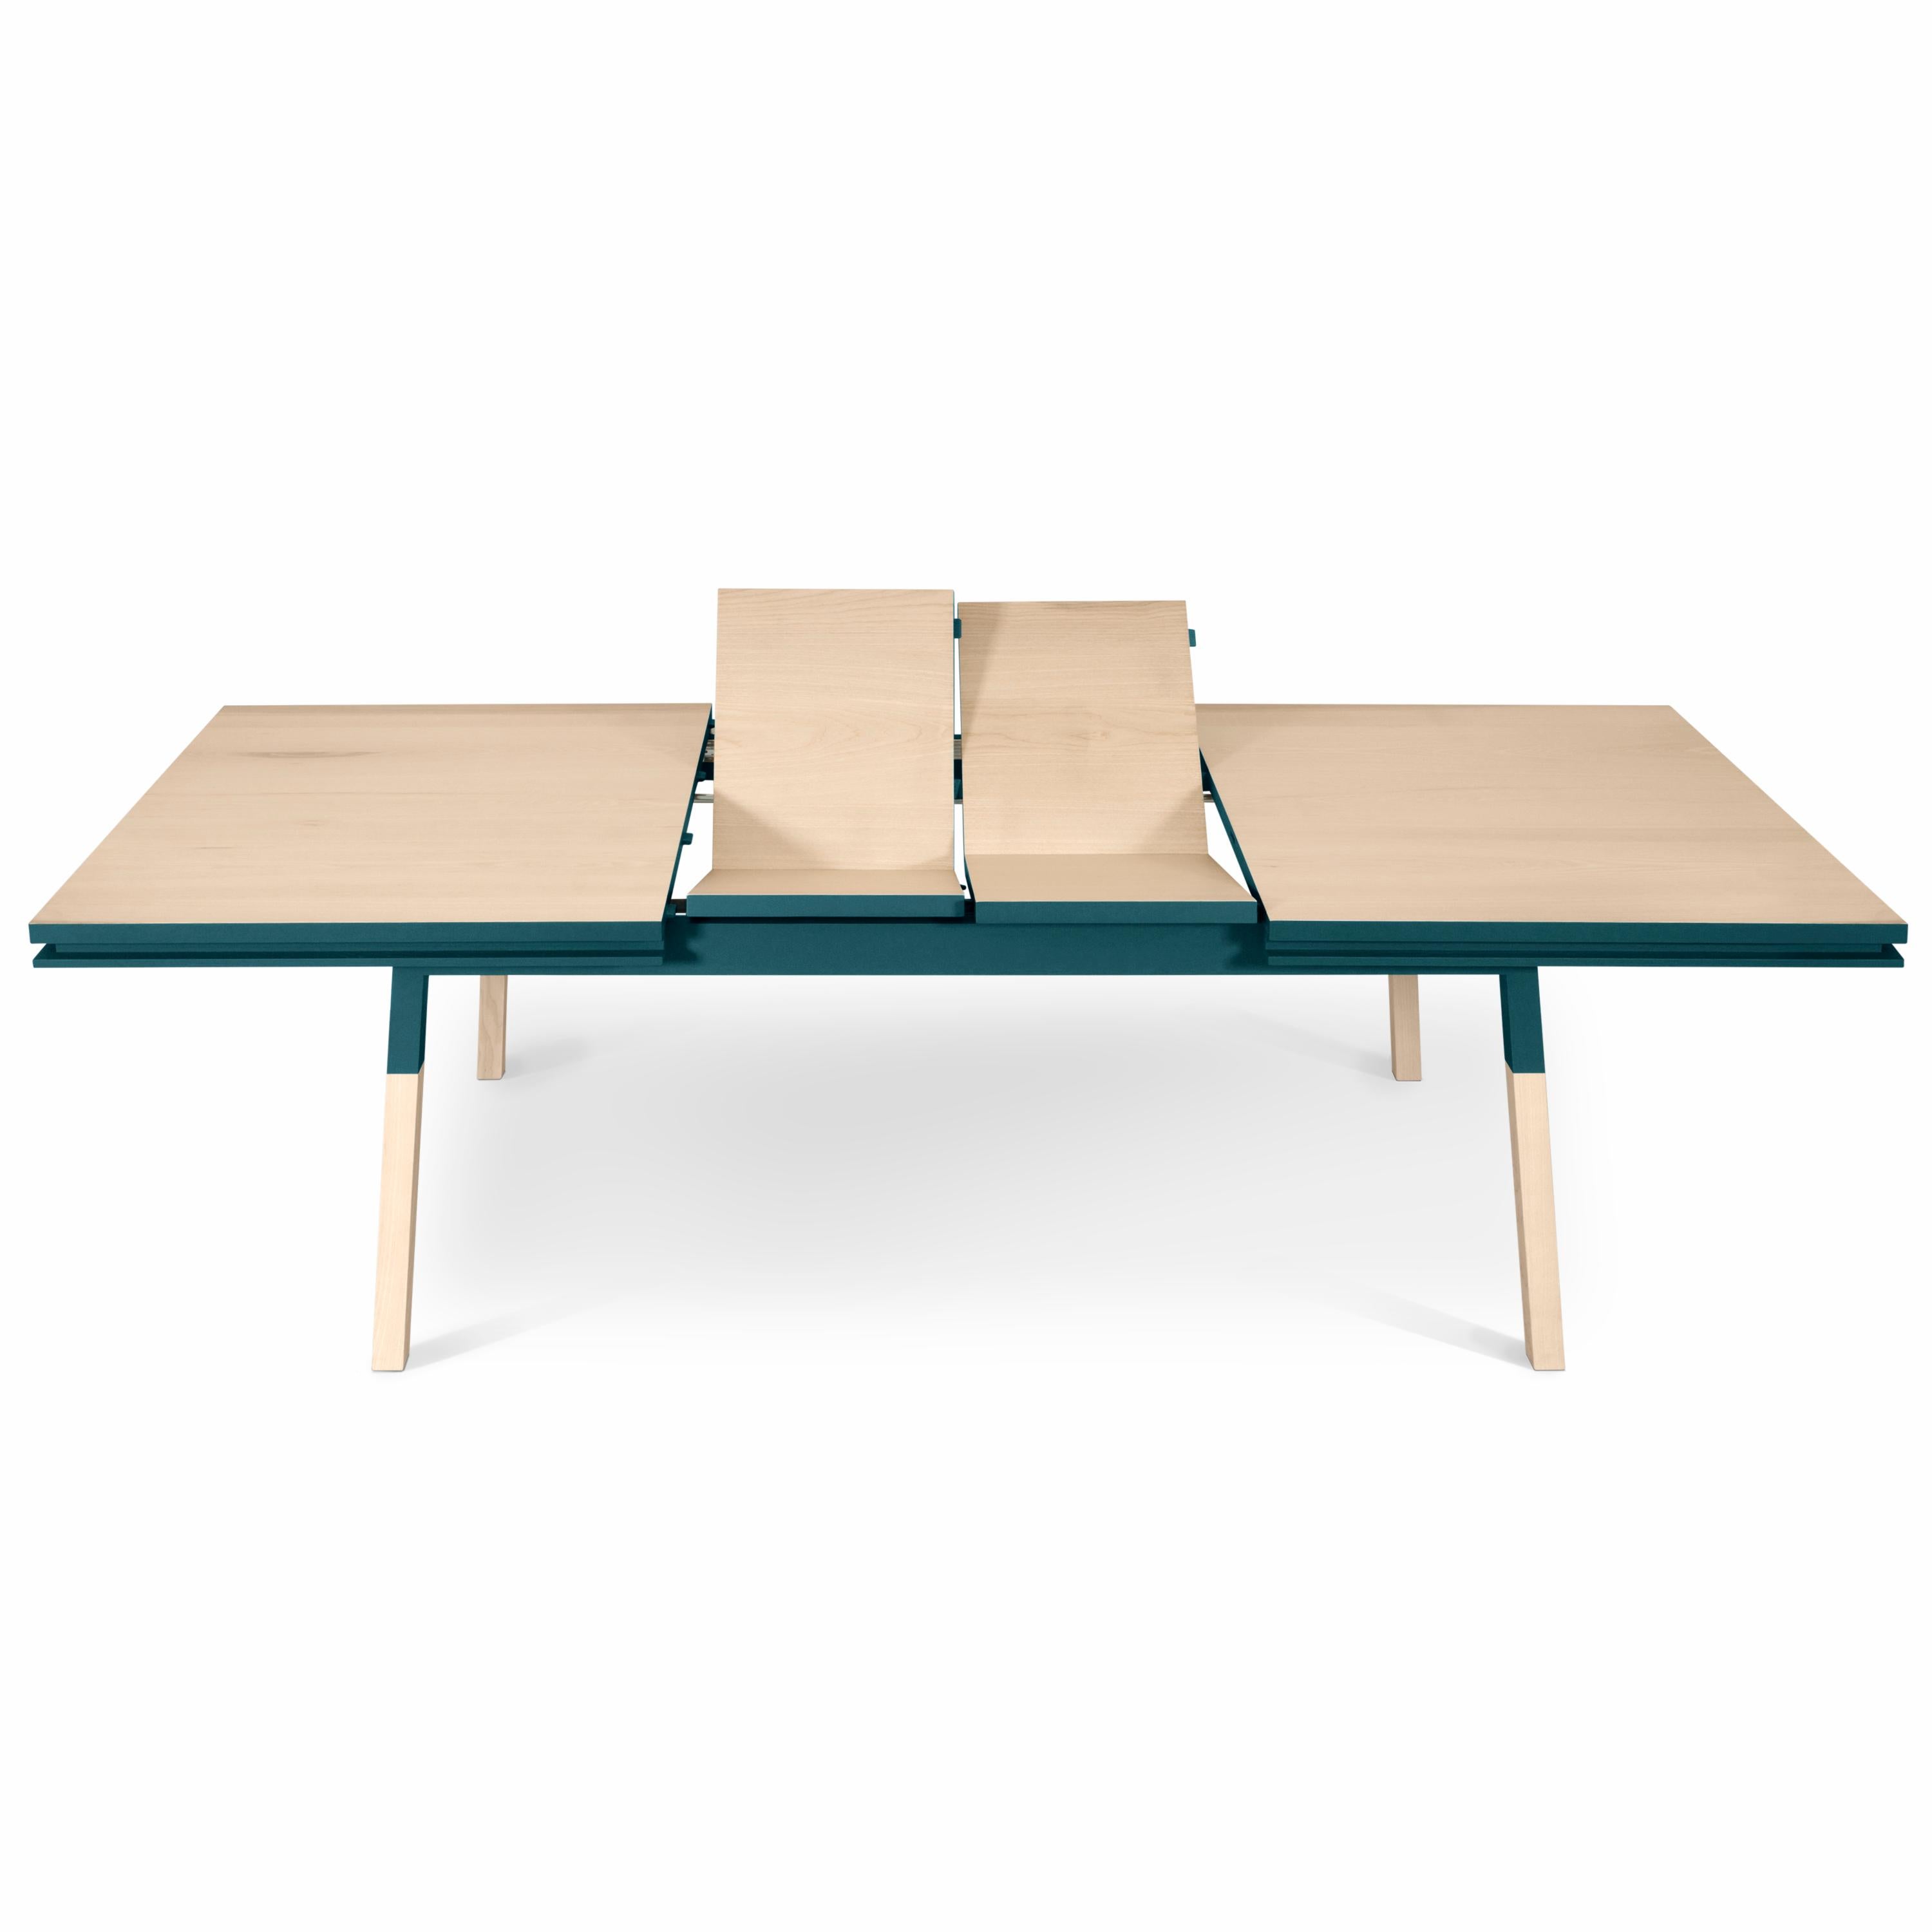 This rectangular dining table is proposed with 2 integrated and folded extensions. 

It is made of 100% solid ash wood from sustainably managed and PEFC certified French forests.

The 3 lengths are 220 cm / 86.6 in when the table is closed, 260 cm /